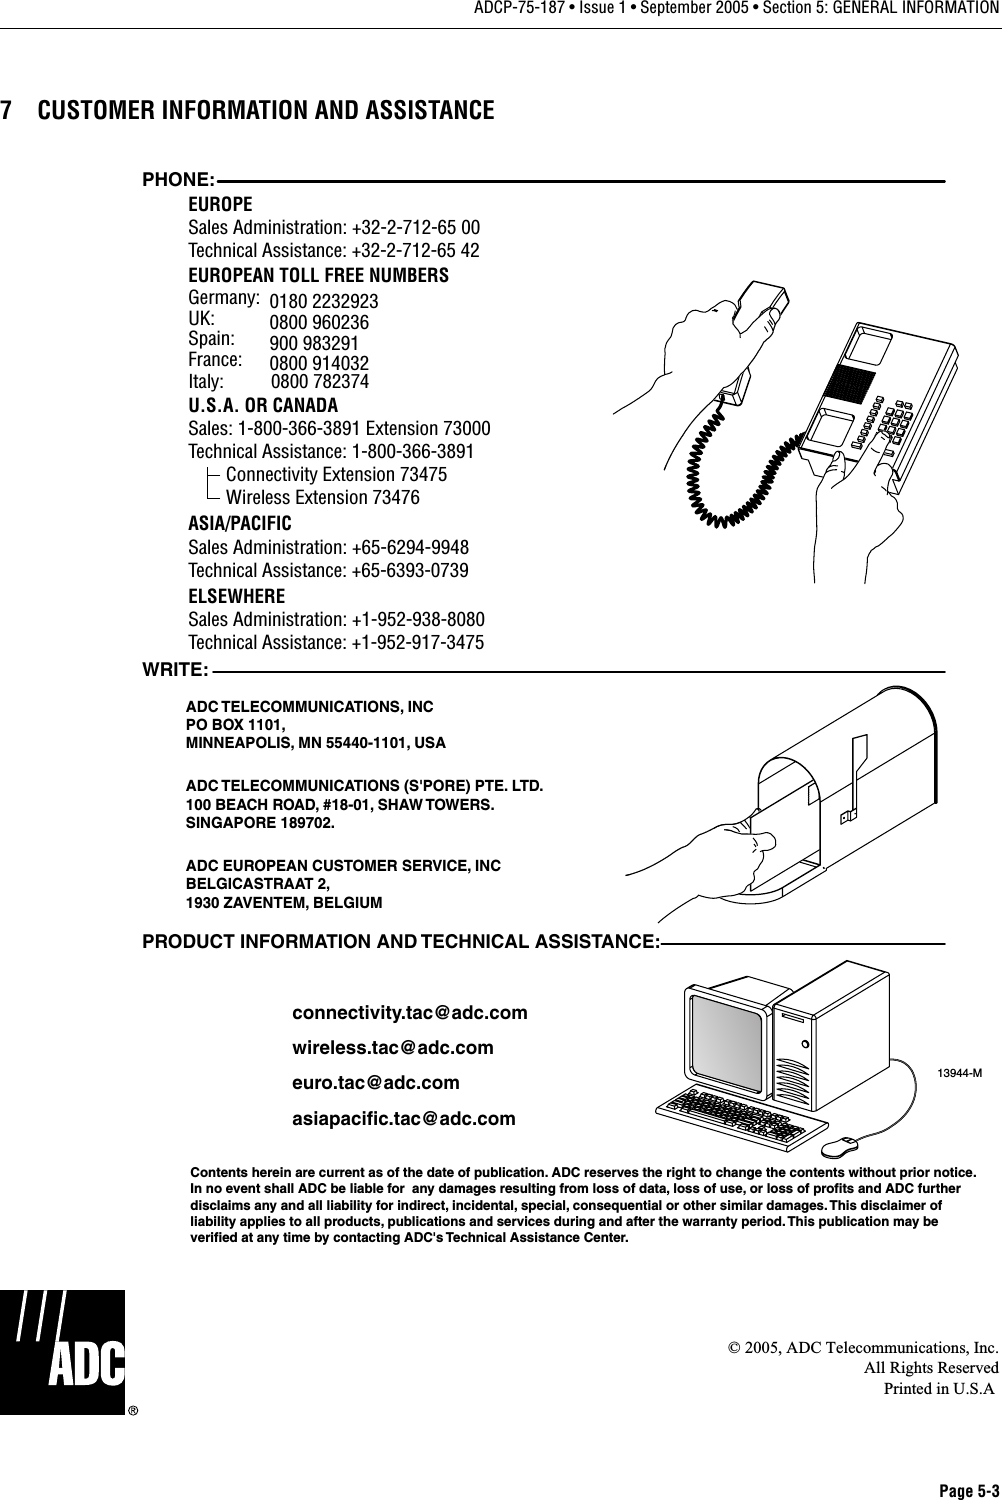 Page 5-3ADCP-75-187 • Issue 1 • September 2005 • Section 5: GENERAL INFORMATION7 CUSTOMER INFORMATION AND ASSISTANCE© 2005, ADC Telecommunications, Inc.All Rights ReservedPrinted in U.S.A13944-MWRITE:ADC TELECOMMUNICATIONS, INCPO BOX 1101,MINNEAPOLIS, MN 55440-1101, USAADC TELECOMMUNICATIONS (S&apos;PORE) PTE. LTD.100 BEACH ROAD, #18-01, SHAW TOWERS.SINGAPORE 189702.ADC EUROPEAN CUSTOMER SERVICE, INCBELGICASTRAAT 2,1930 ZAVENTEM, BELGIUMPHONE:EUROPESales Administration: +32-2-712-65 00Technical Assistance: +32-2-712-65 42EUROPEAN TOLL FREE NUMBERSUK: 0800 960236Spain: 900 983291France: 0800 914032Germany: 0180 2232923U.S.A. OR CANADASales: 1-800-366-3891 Extension 73000Technical Assistance: 1-800-366-3891        Connectivity Extension 73475        Wireless Extension 73476ASIA/PACIFICSales Administration: +65-6294-9948Technical Assistance: +65-6393-0739ELSEWHERESales Administration: +1-952-938-8080Technical Assistance: +1-952-917-3475Italy:          0800 782374PRODUCT INFORMATION AND TECHNICAL ASSISTANCE:Contents herein are current as of the date of publication. ADC reserves the right to change the contents without prior notice.In no event shall ADC be liable for  any damages resulting from loss of data, loss of use, or loss of profits and ADC furtherdisclaims any and all liability for indirect, incidental, special, consequential or other similar damages. This disclaimer ofliability applies to all products, publications and services during and after the warranty period. This publication may beverified at any time by contacting ADC&apos;s Technical Assistance Center. euro.tac@adc.comasiapacific.tac@adc.comwireless.tac@adc.comconnectivity.tac@adc.com